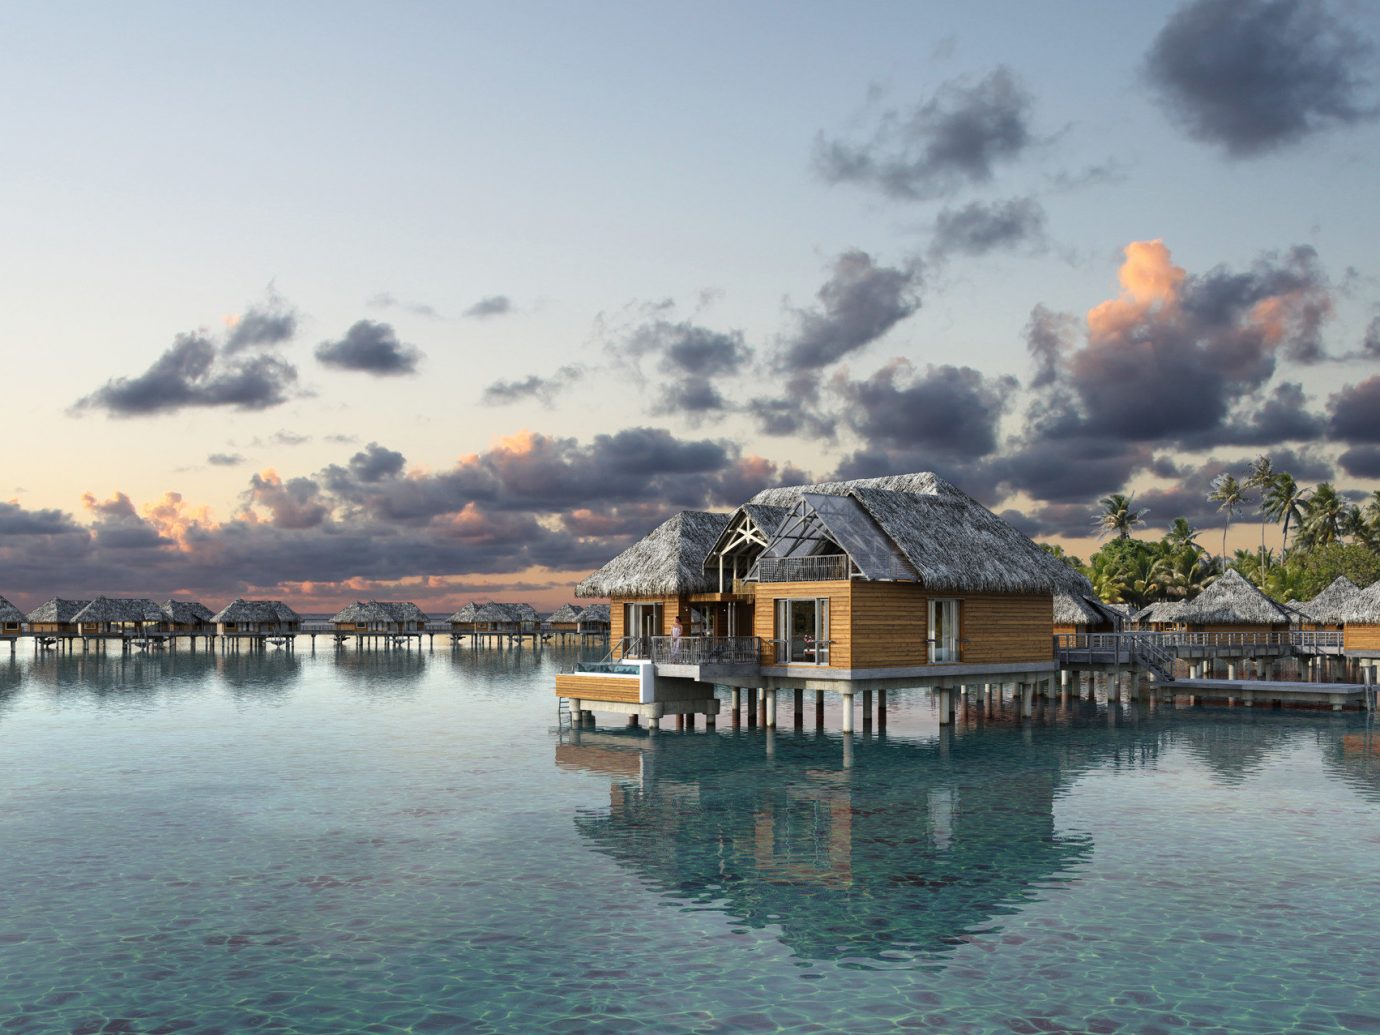 Hotels outdoor sky water reflection waterway scene cloud tree morning house evening Lake tourist attraction River Sea calm Sunset landscape dawn bayou plant dusk bank dock traveling tourism sunrise day